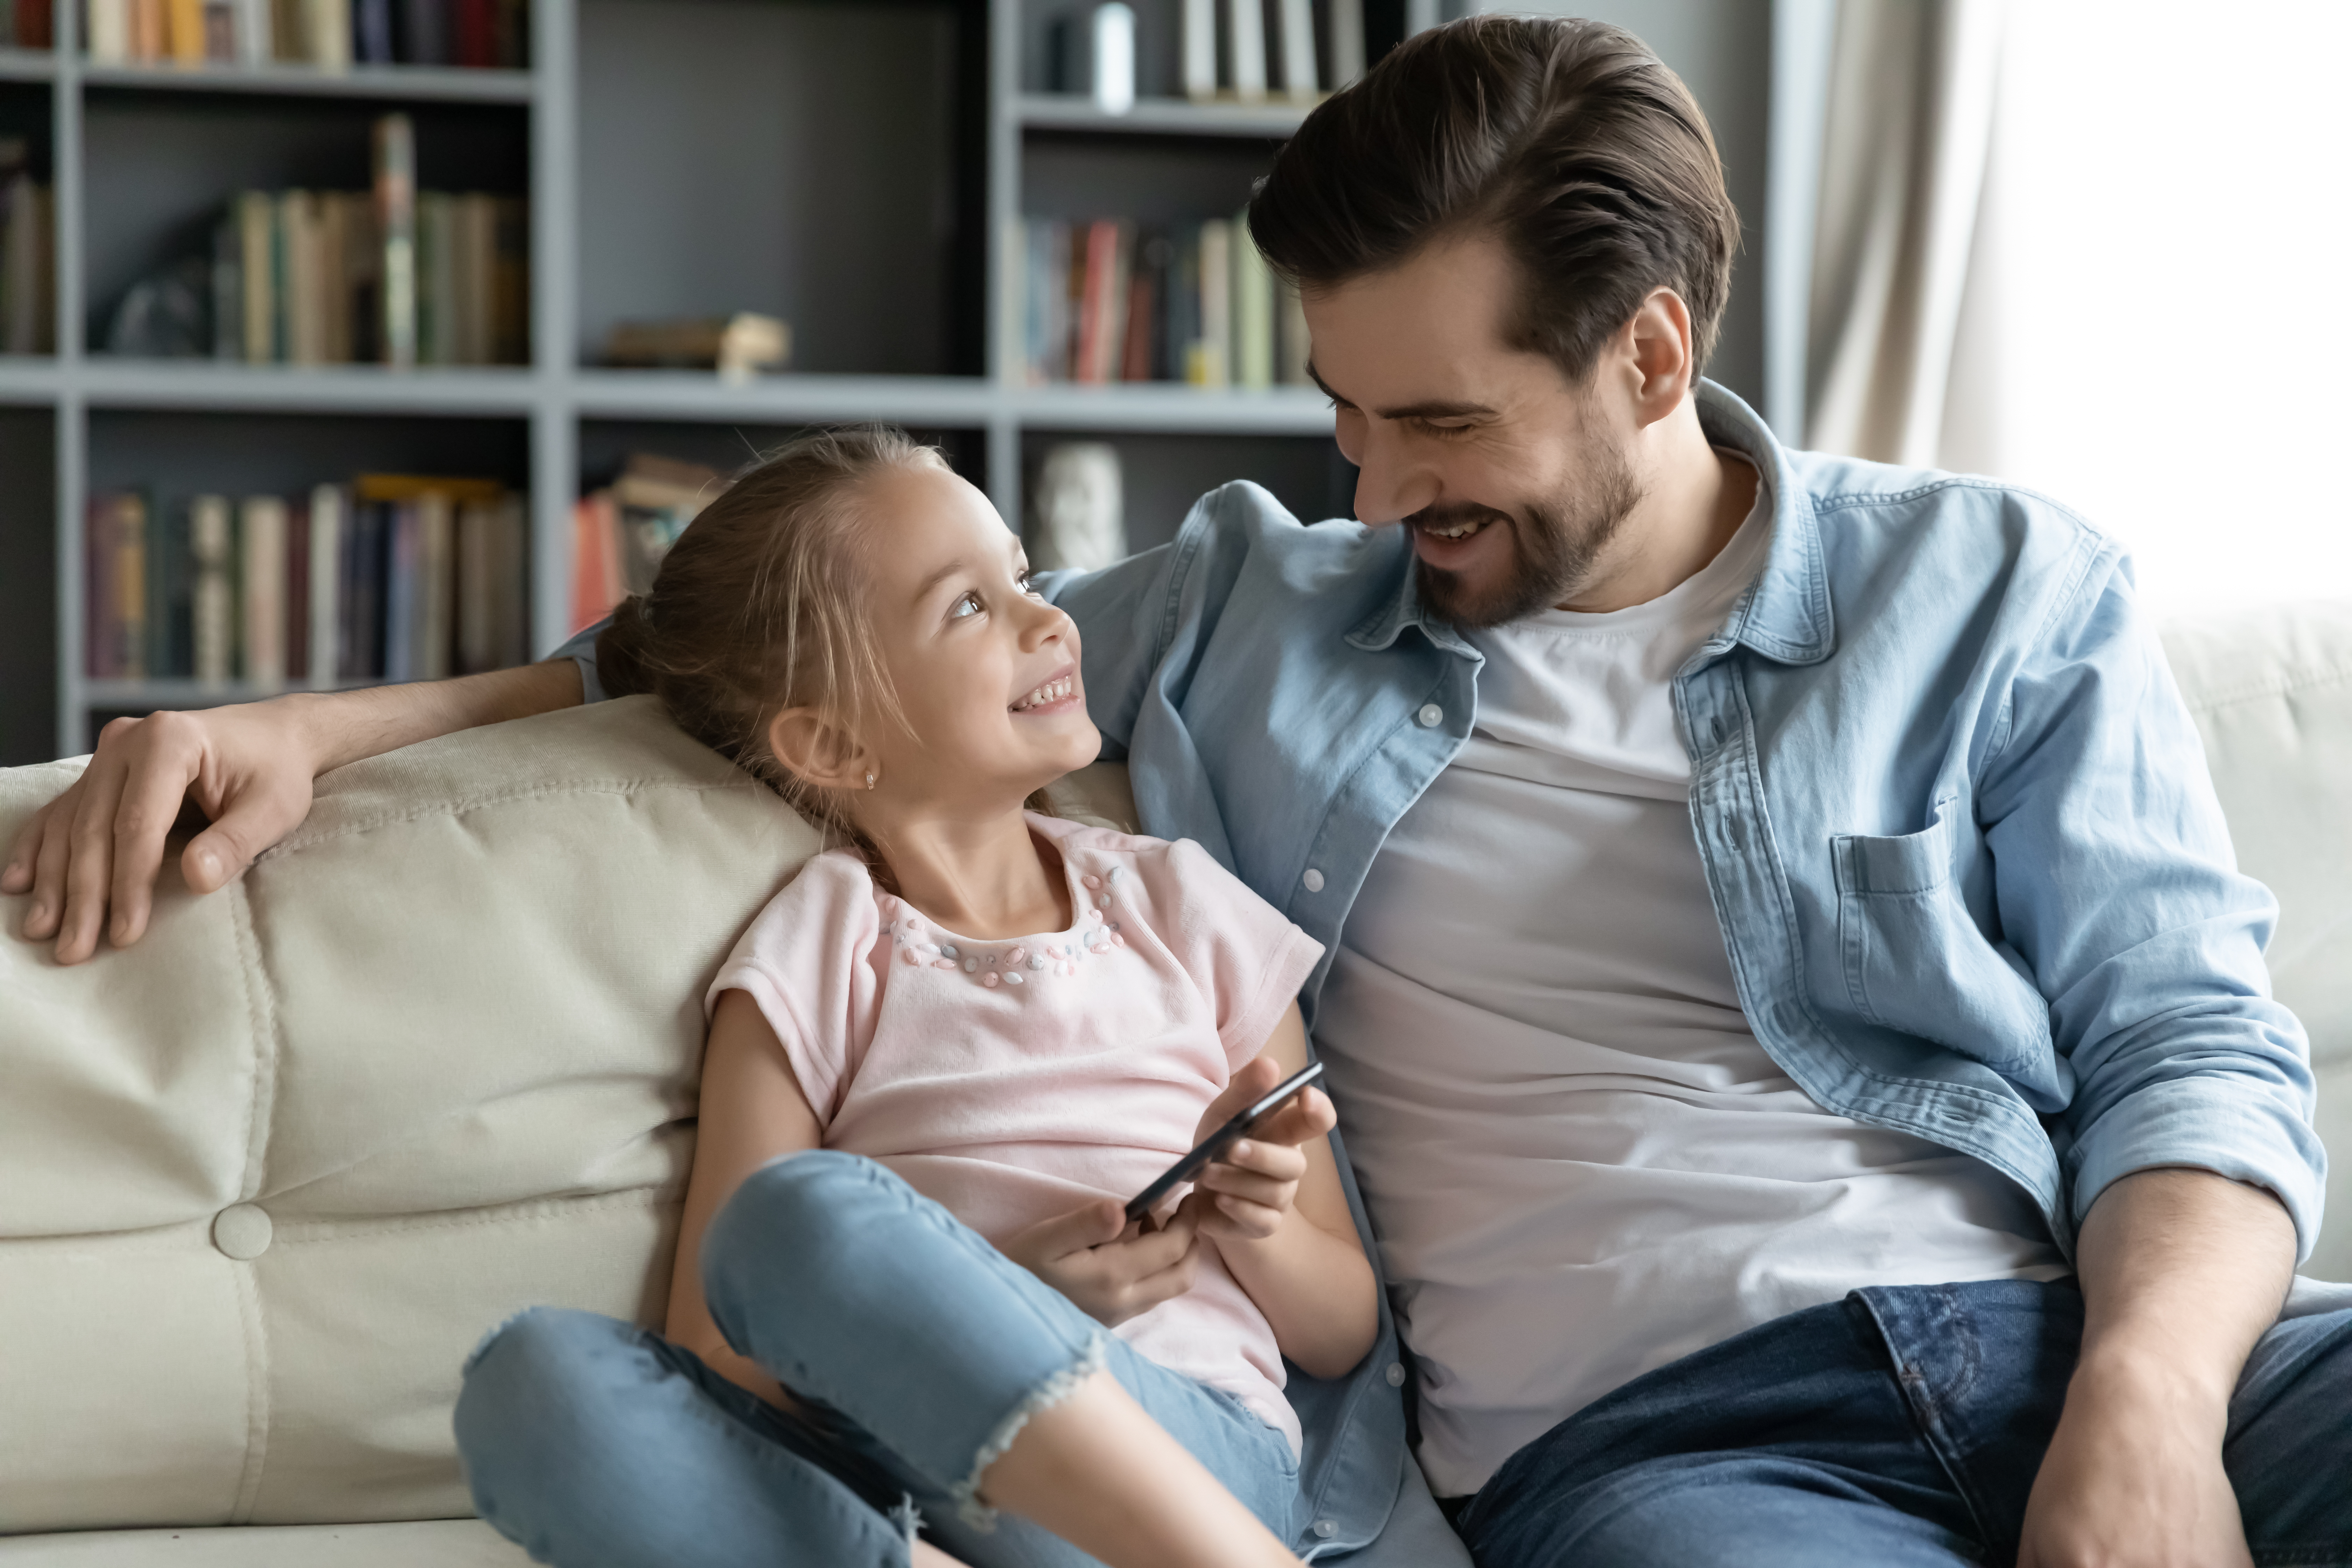 A little girl spending time with her dad at home | Source: Shutterstock